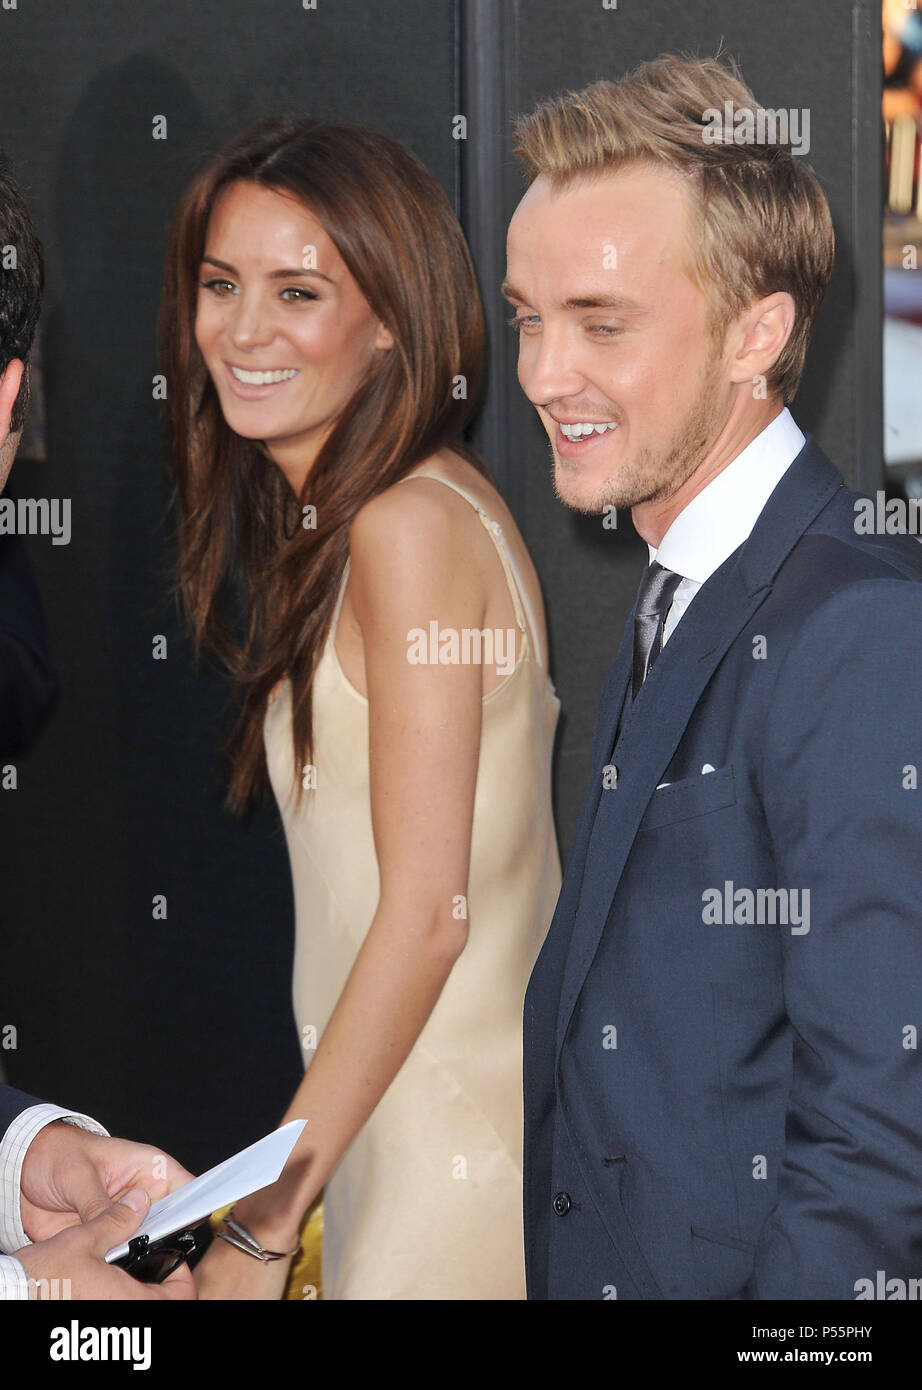 Tom Felton and Jade Gordon , arriving at the Rise of The Planet Of The Apes  Premiere at the Chinese Theatre In Los Angeles.Tom Felton and Jade Gordon  56 ------------- Red Carpet